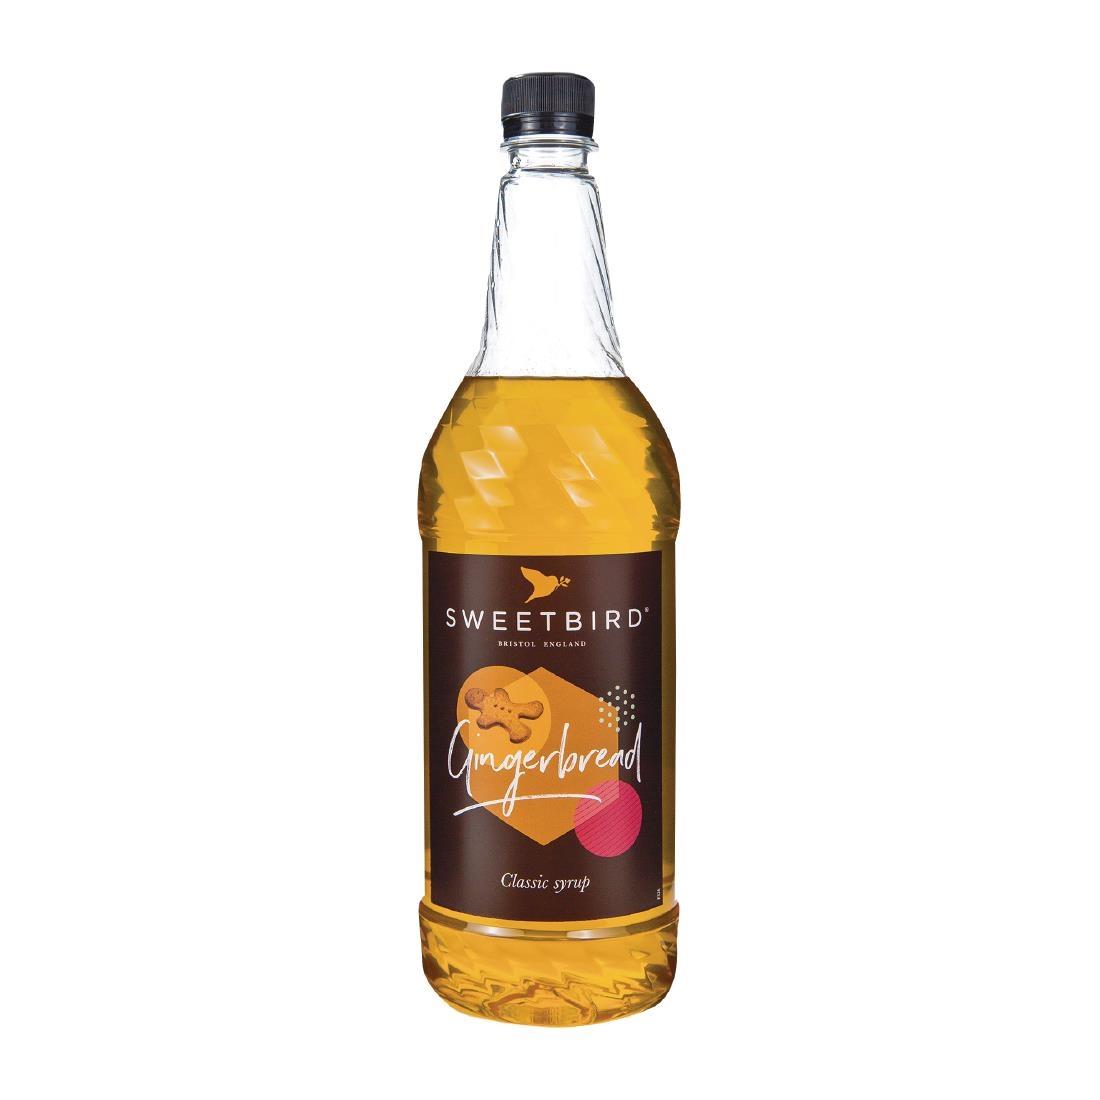 Sweetbird Gingerbread Syrup 1 Ltr - FS244  - 1